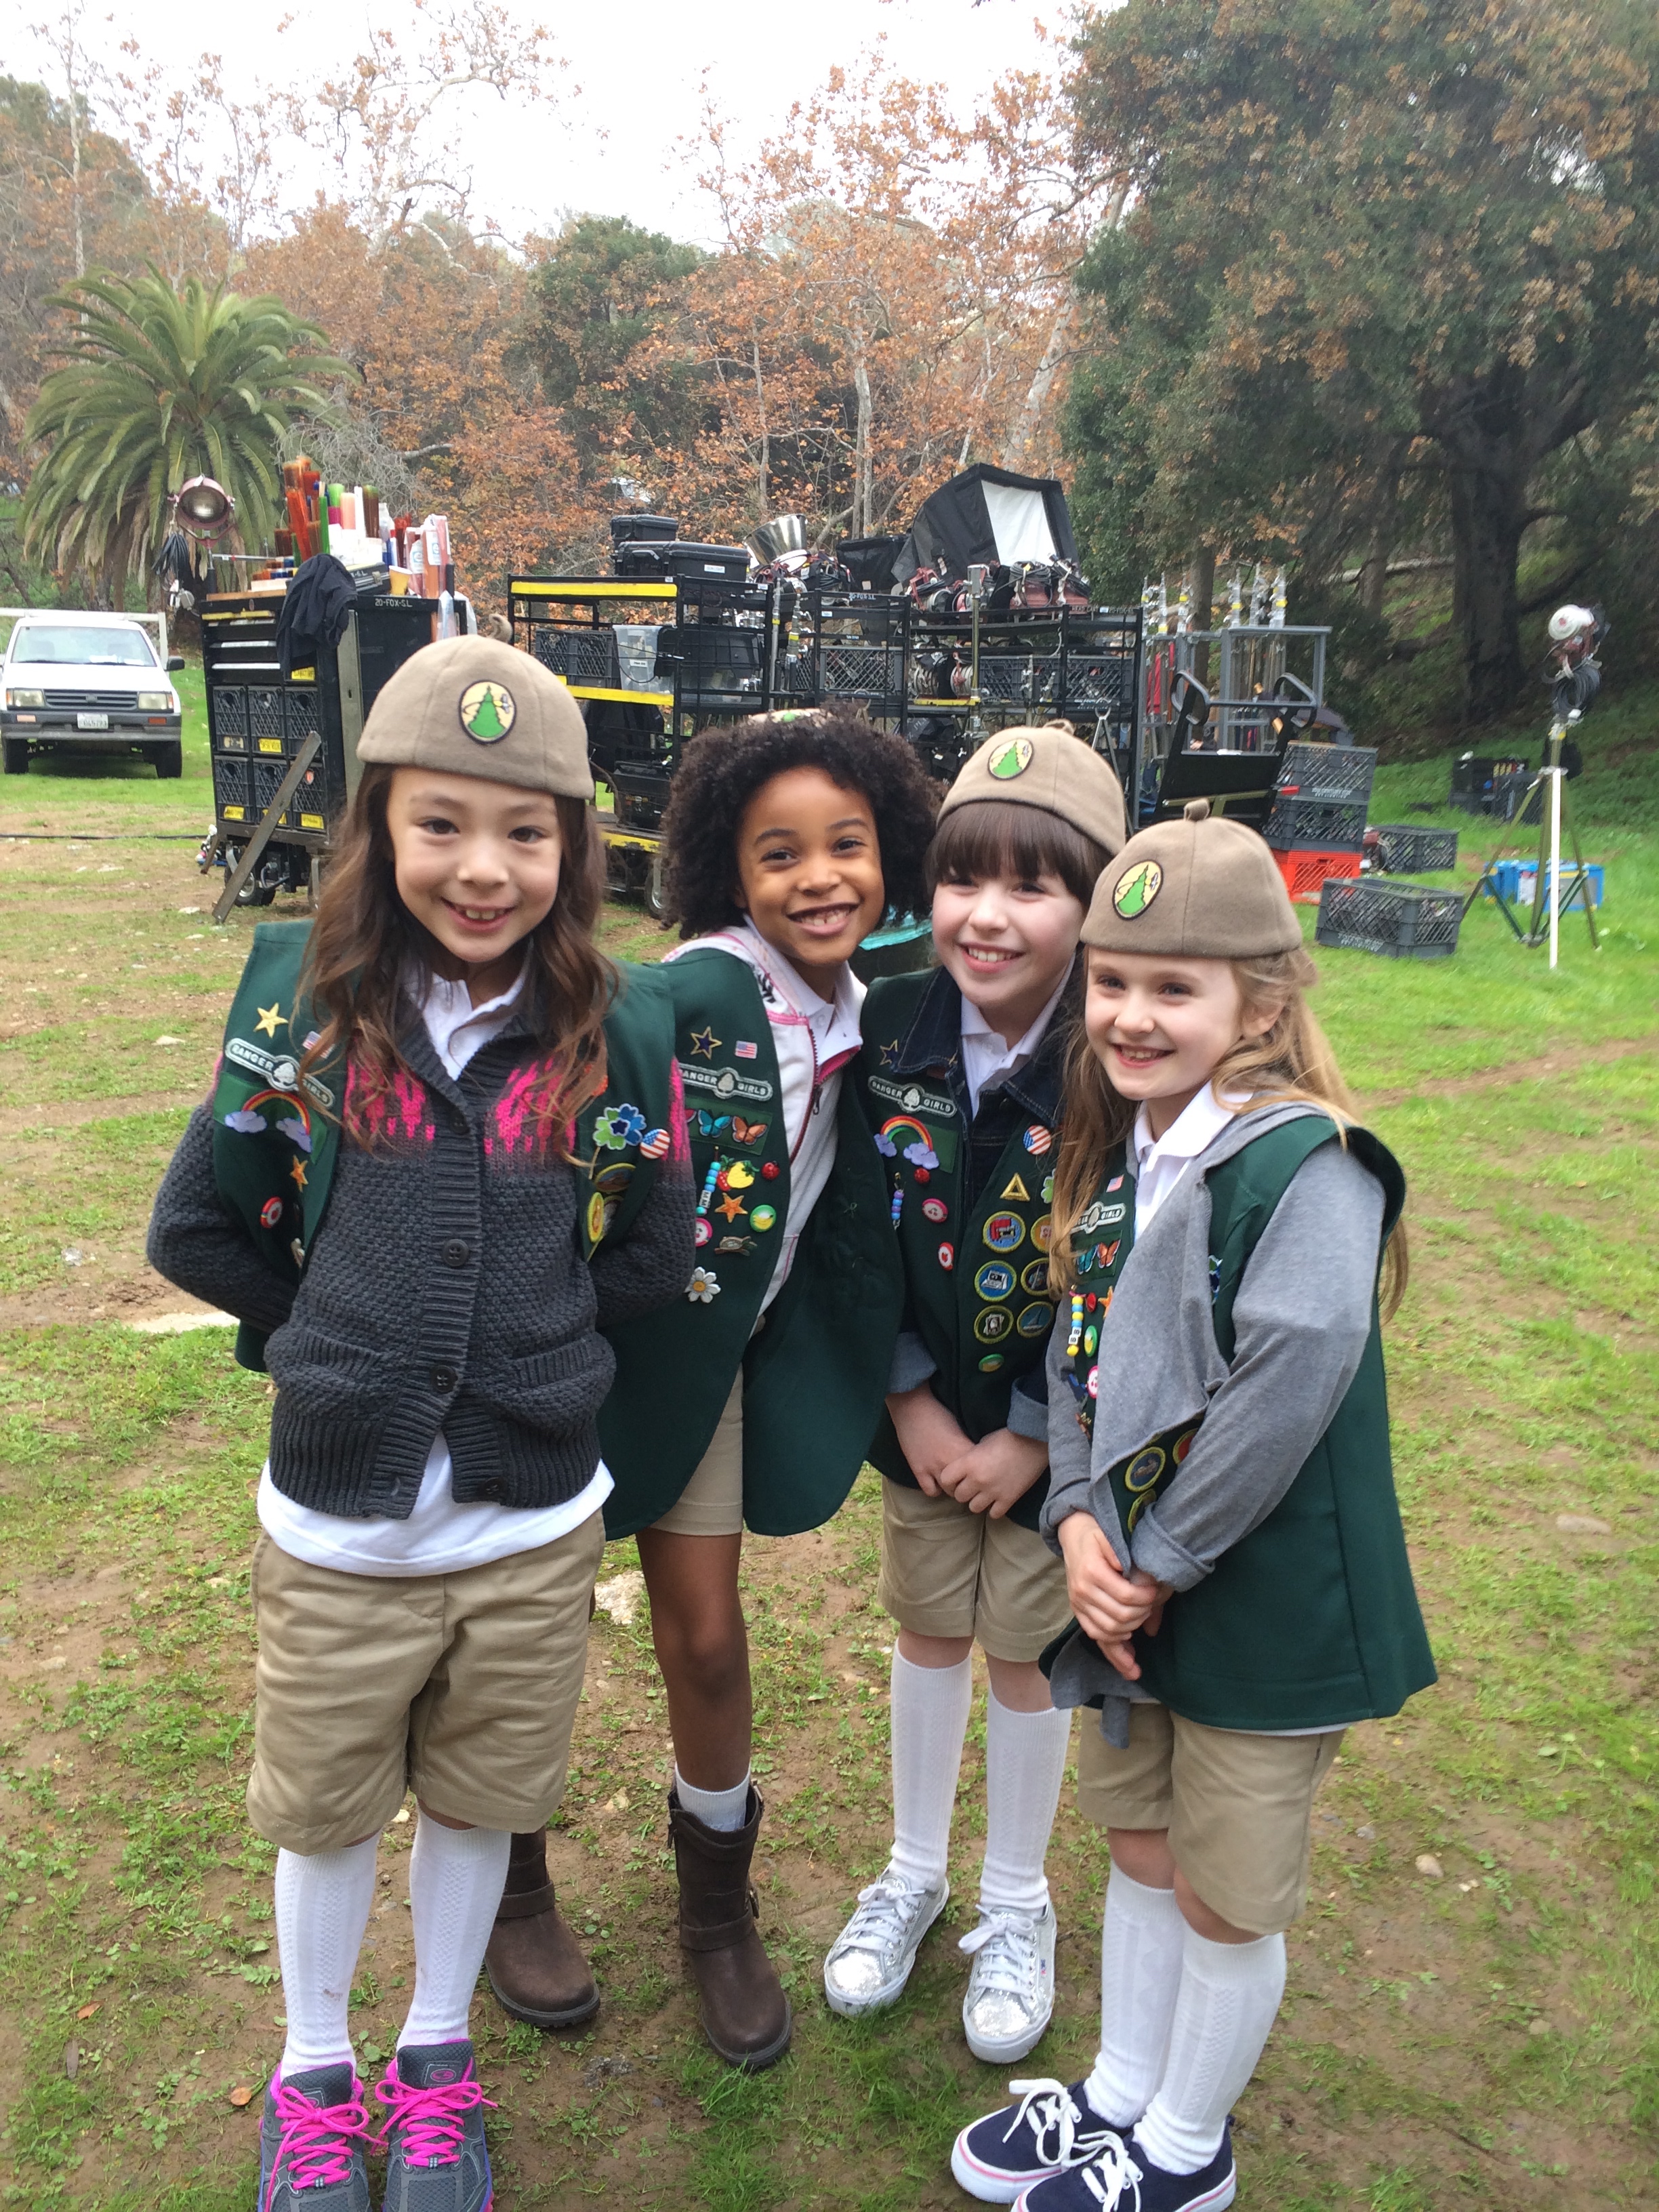 Ashlyn with Aubrey Anderson-Emmons, Rigel Blue, and Aubree Young on location with Modern Family.